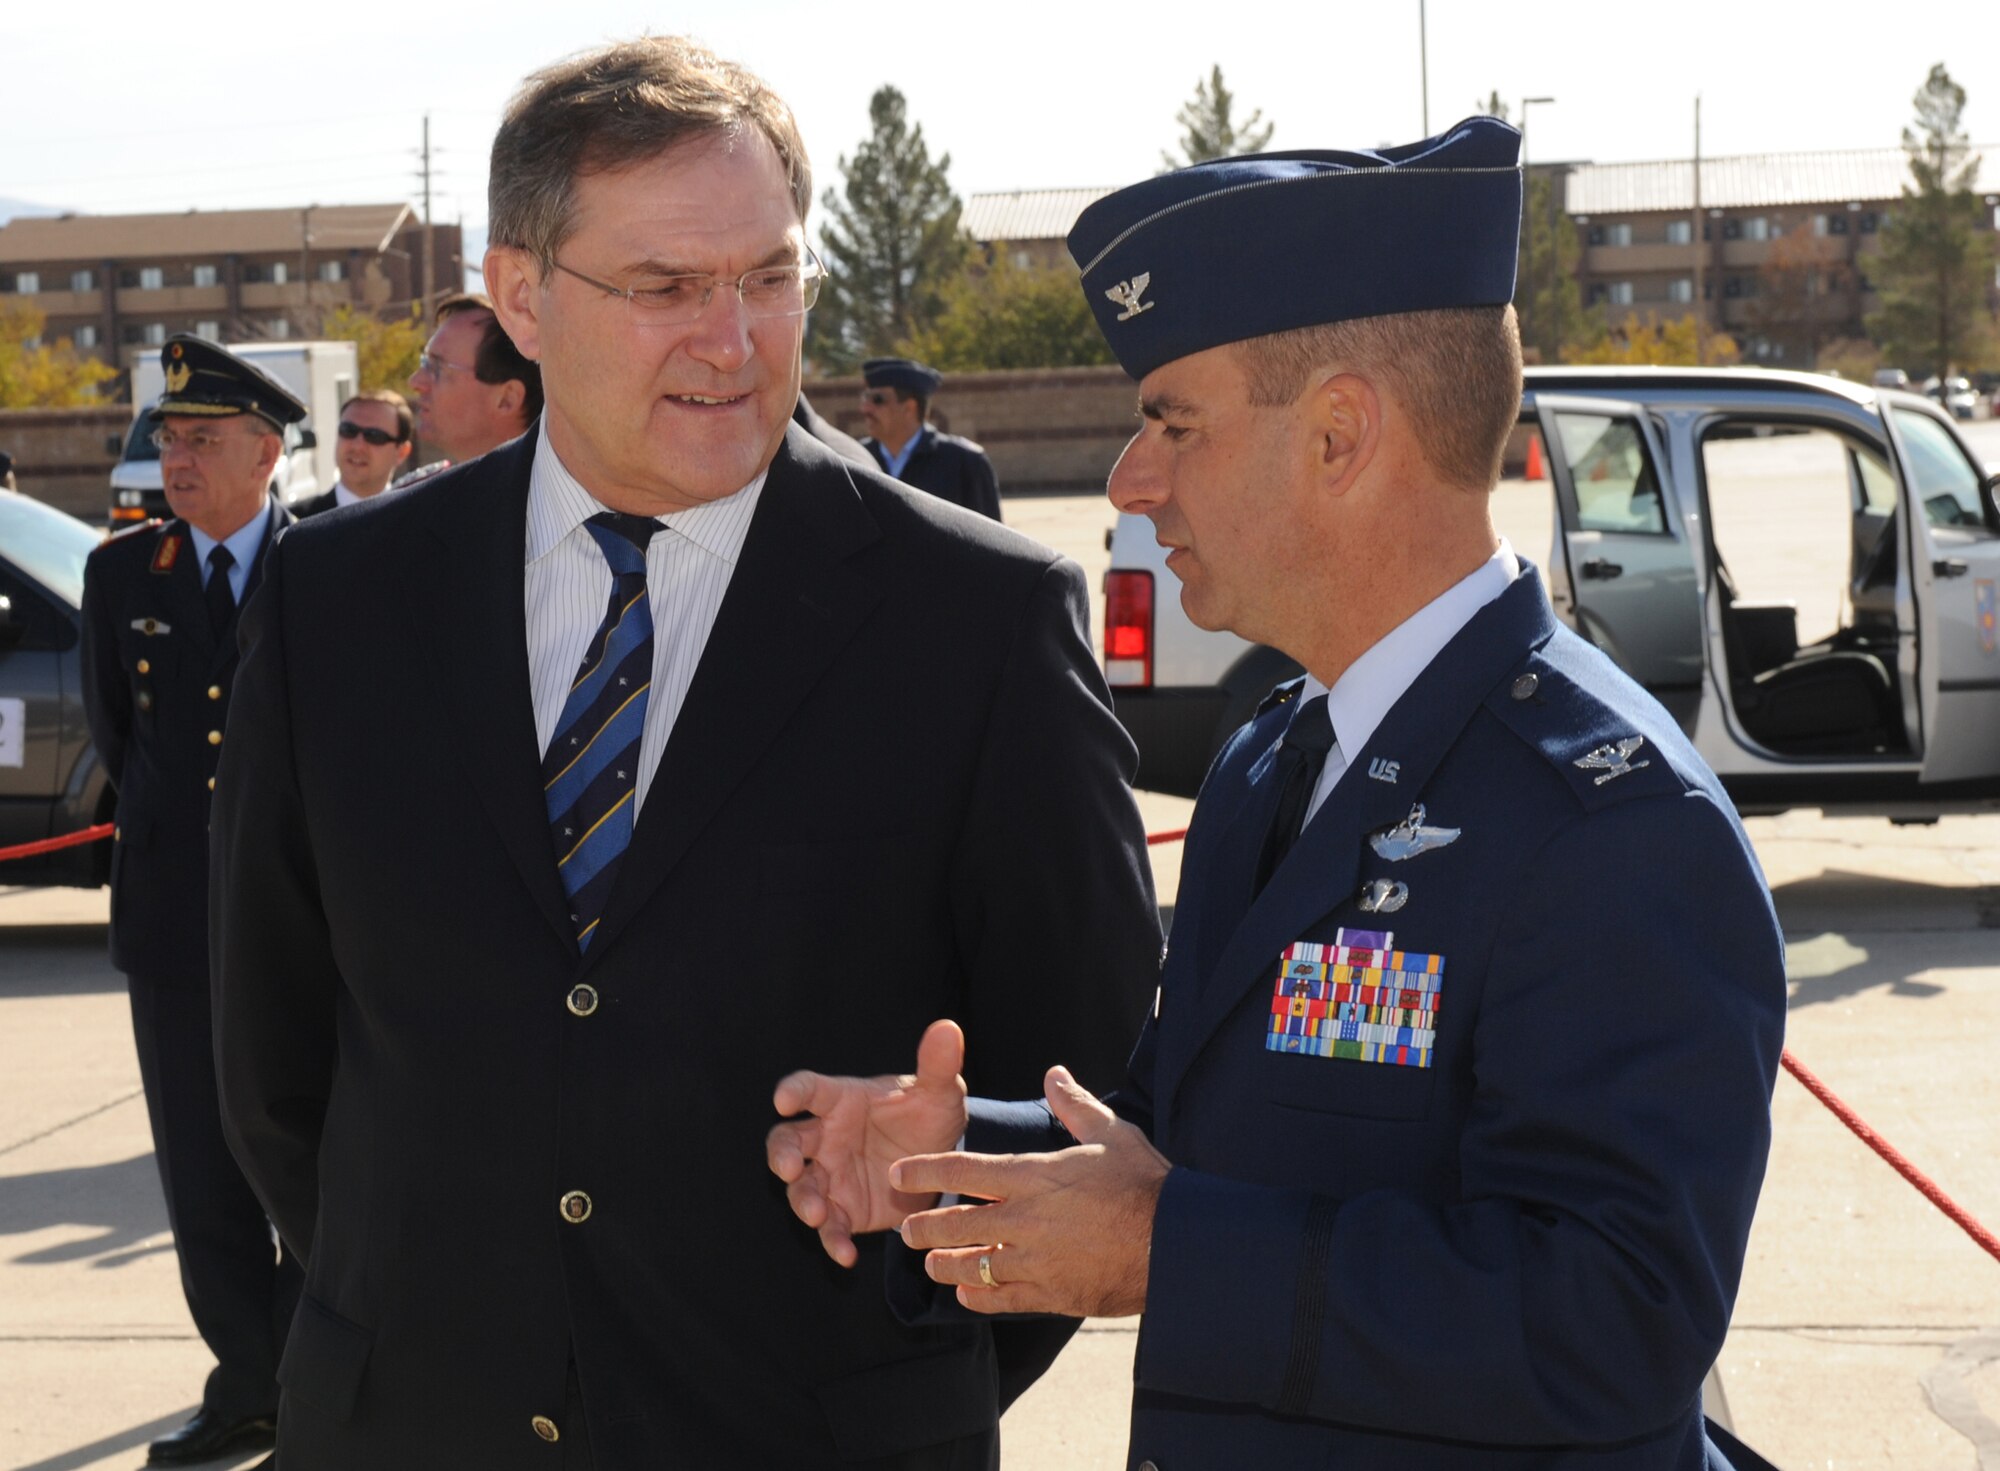 Col. Jeff Harrigian, 49th Fighter Wing commander, speaks with Minister Franz Josef Jung, German Minister of Defense, during his visit to Holloman Air Force Base, N.M., Nov. 24. Minister Jung came to visit Holloman to see the German Air Force Flying Training Center. The German air force has been training its aircrews throughout the United States since 1958 before it was moved to Holloman in 1992. (U.S. Air Force photo/Airman 1st Class Michael Means)